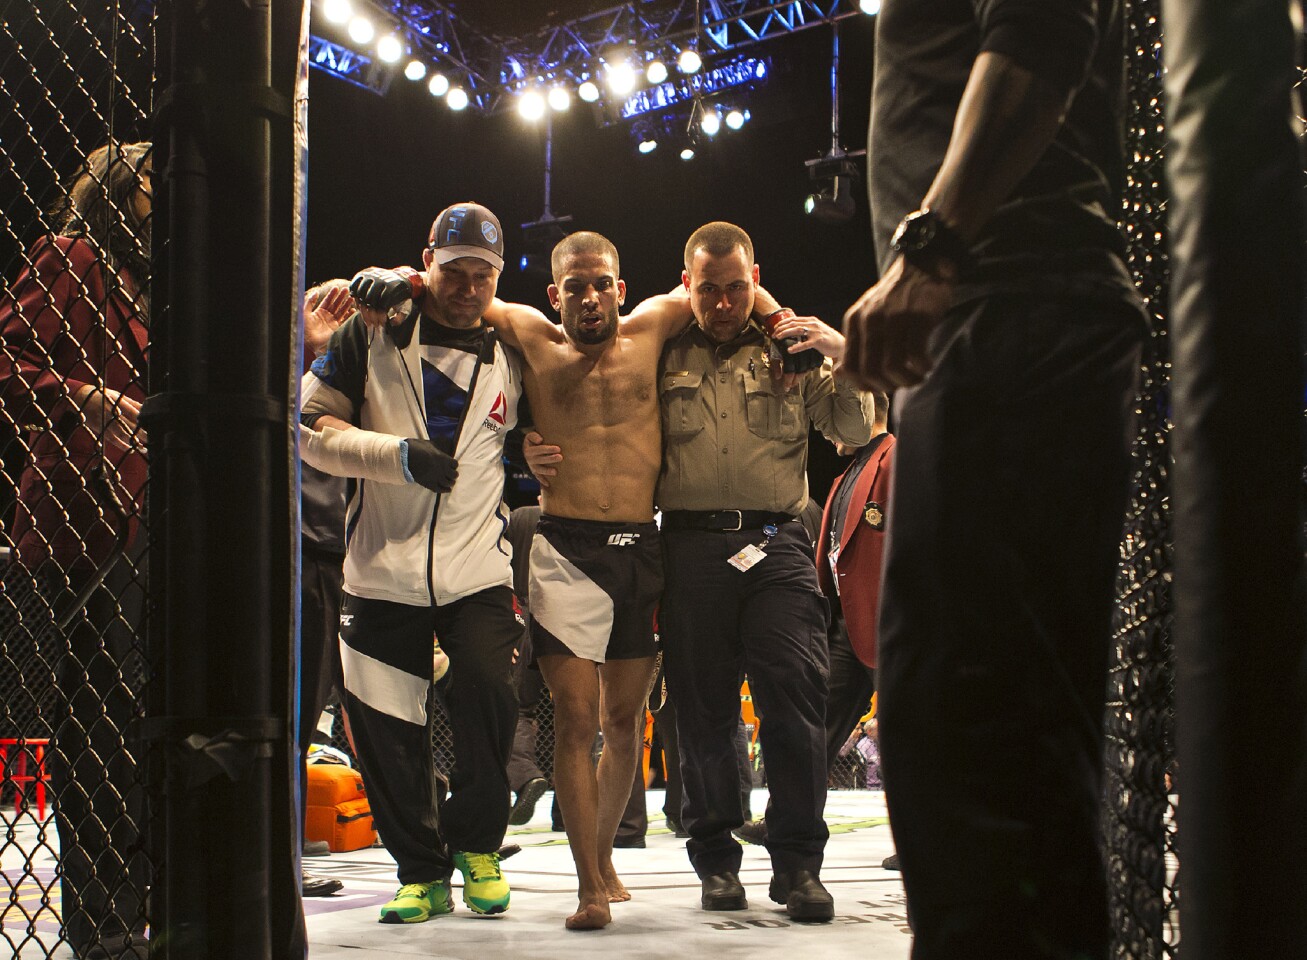 Featherweight Noad Lahat is assisted from the octagon by medical personnel after being knocked out by Diego Rivas during UFC Fight Night 82 at the MGM Grand Garden Arena in Las Vegas on Saturday, February 6 2016. (L.E. Baskow/Las Vegas Sun via AP) LAS VEGAS REVIEW-JOURNAL;MANDATORY CREDITS